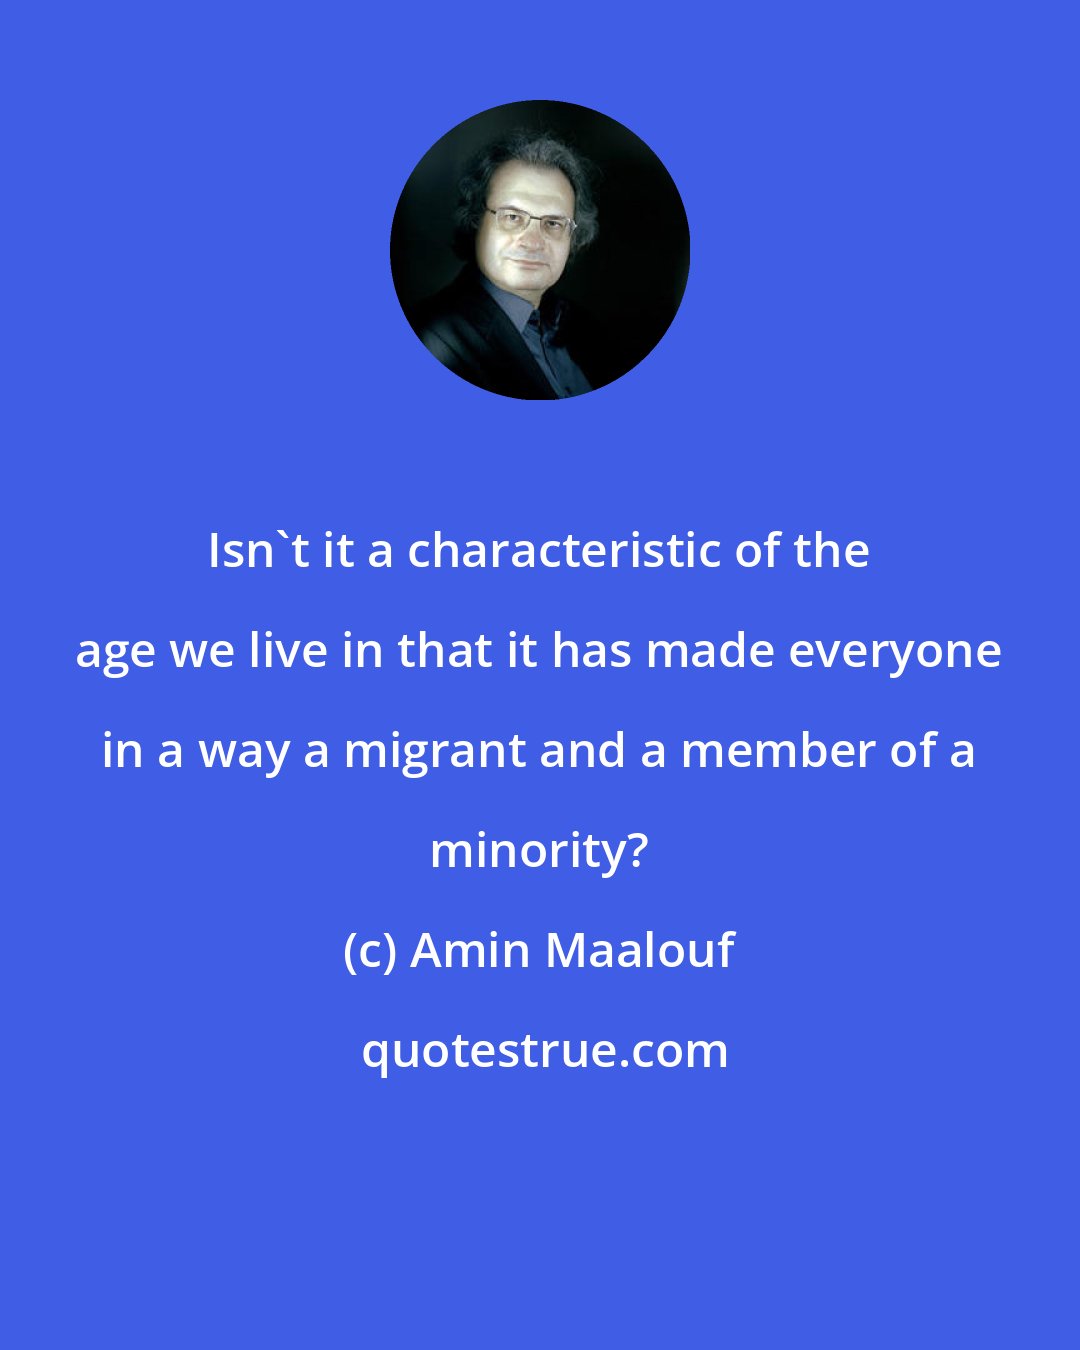 Amin Maalouf: Isn't it a characteristic of the age we live in that it has made everyone in a way a migrant and a member of a minority?